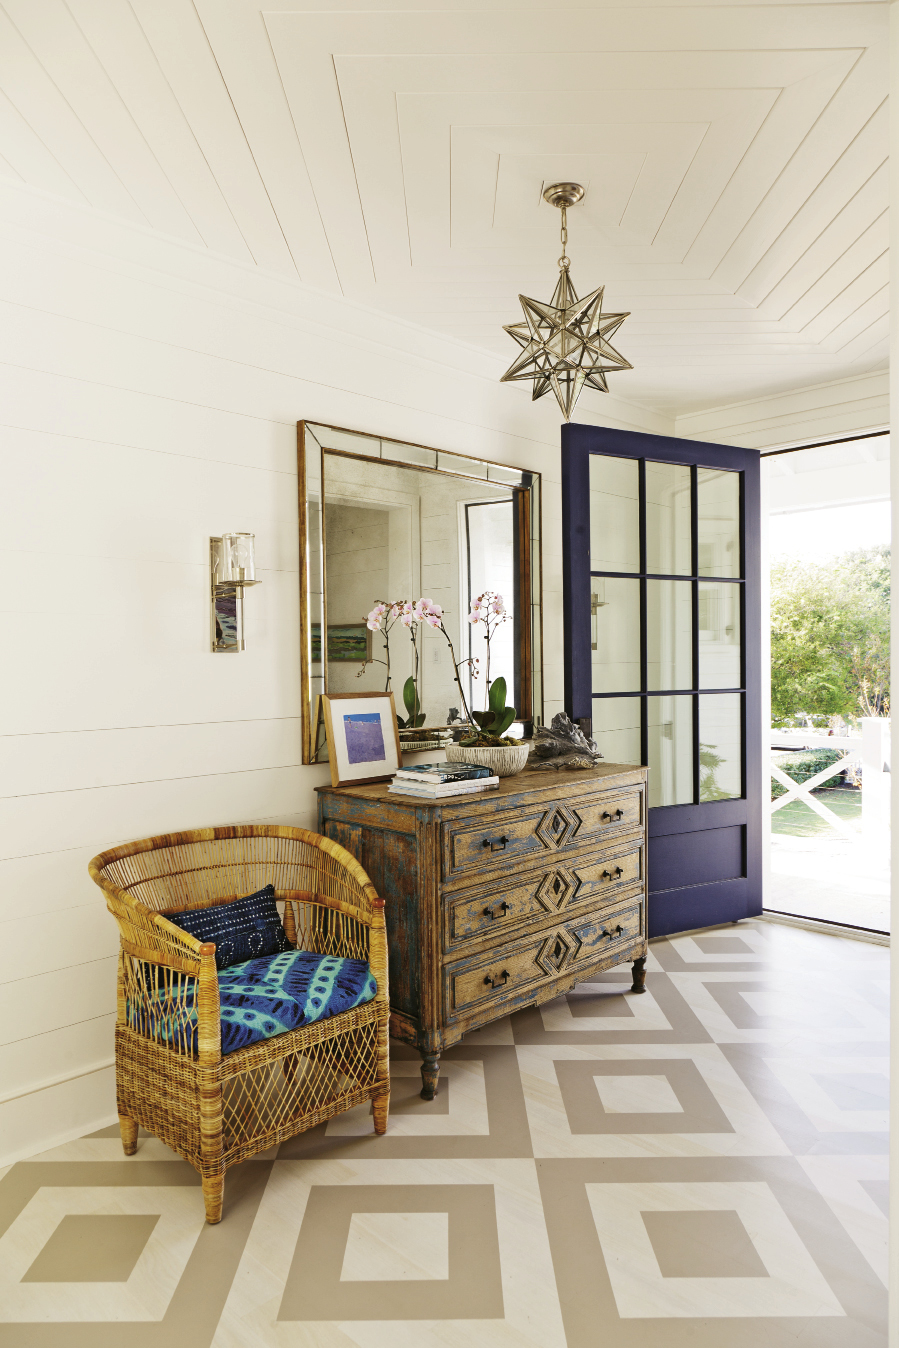 Surfs Up: A painted foyer floor helps “gives an unexpected punch, leading upstairs,” says Keenan.